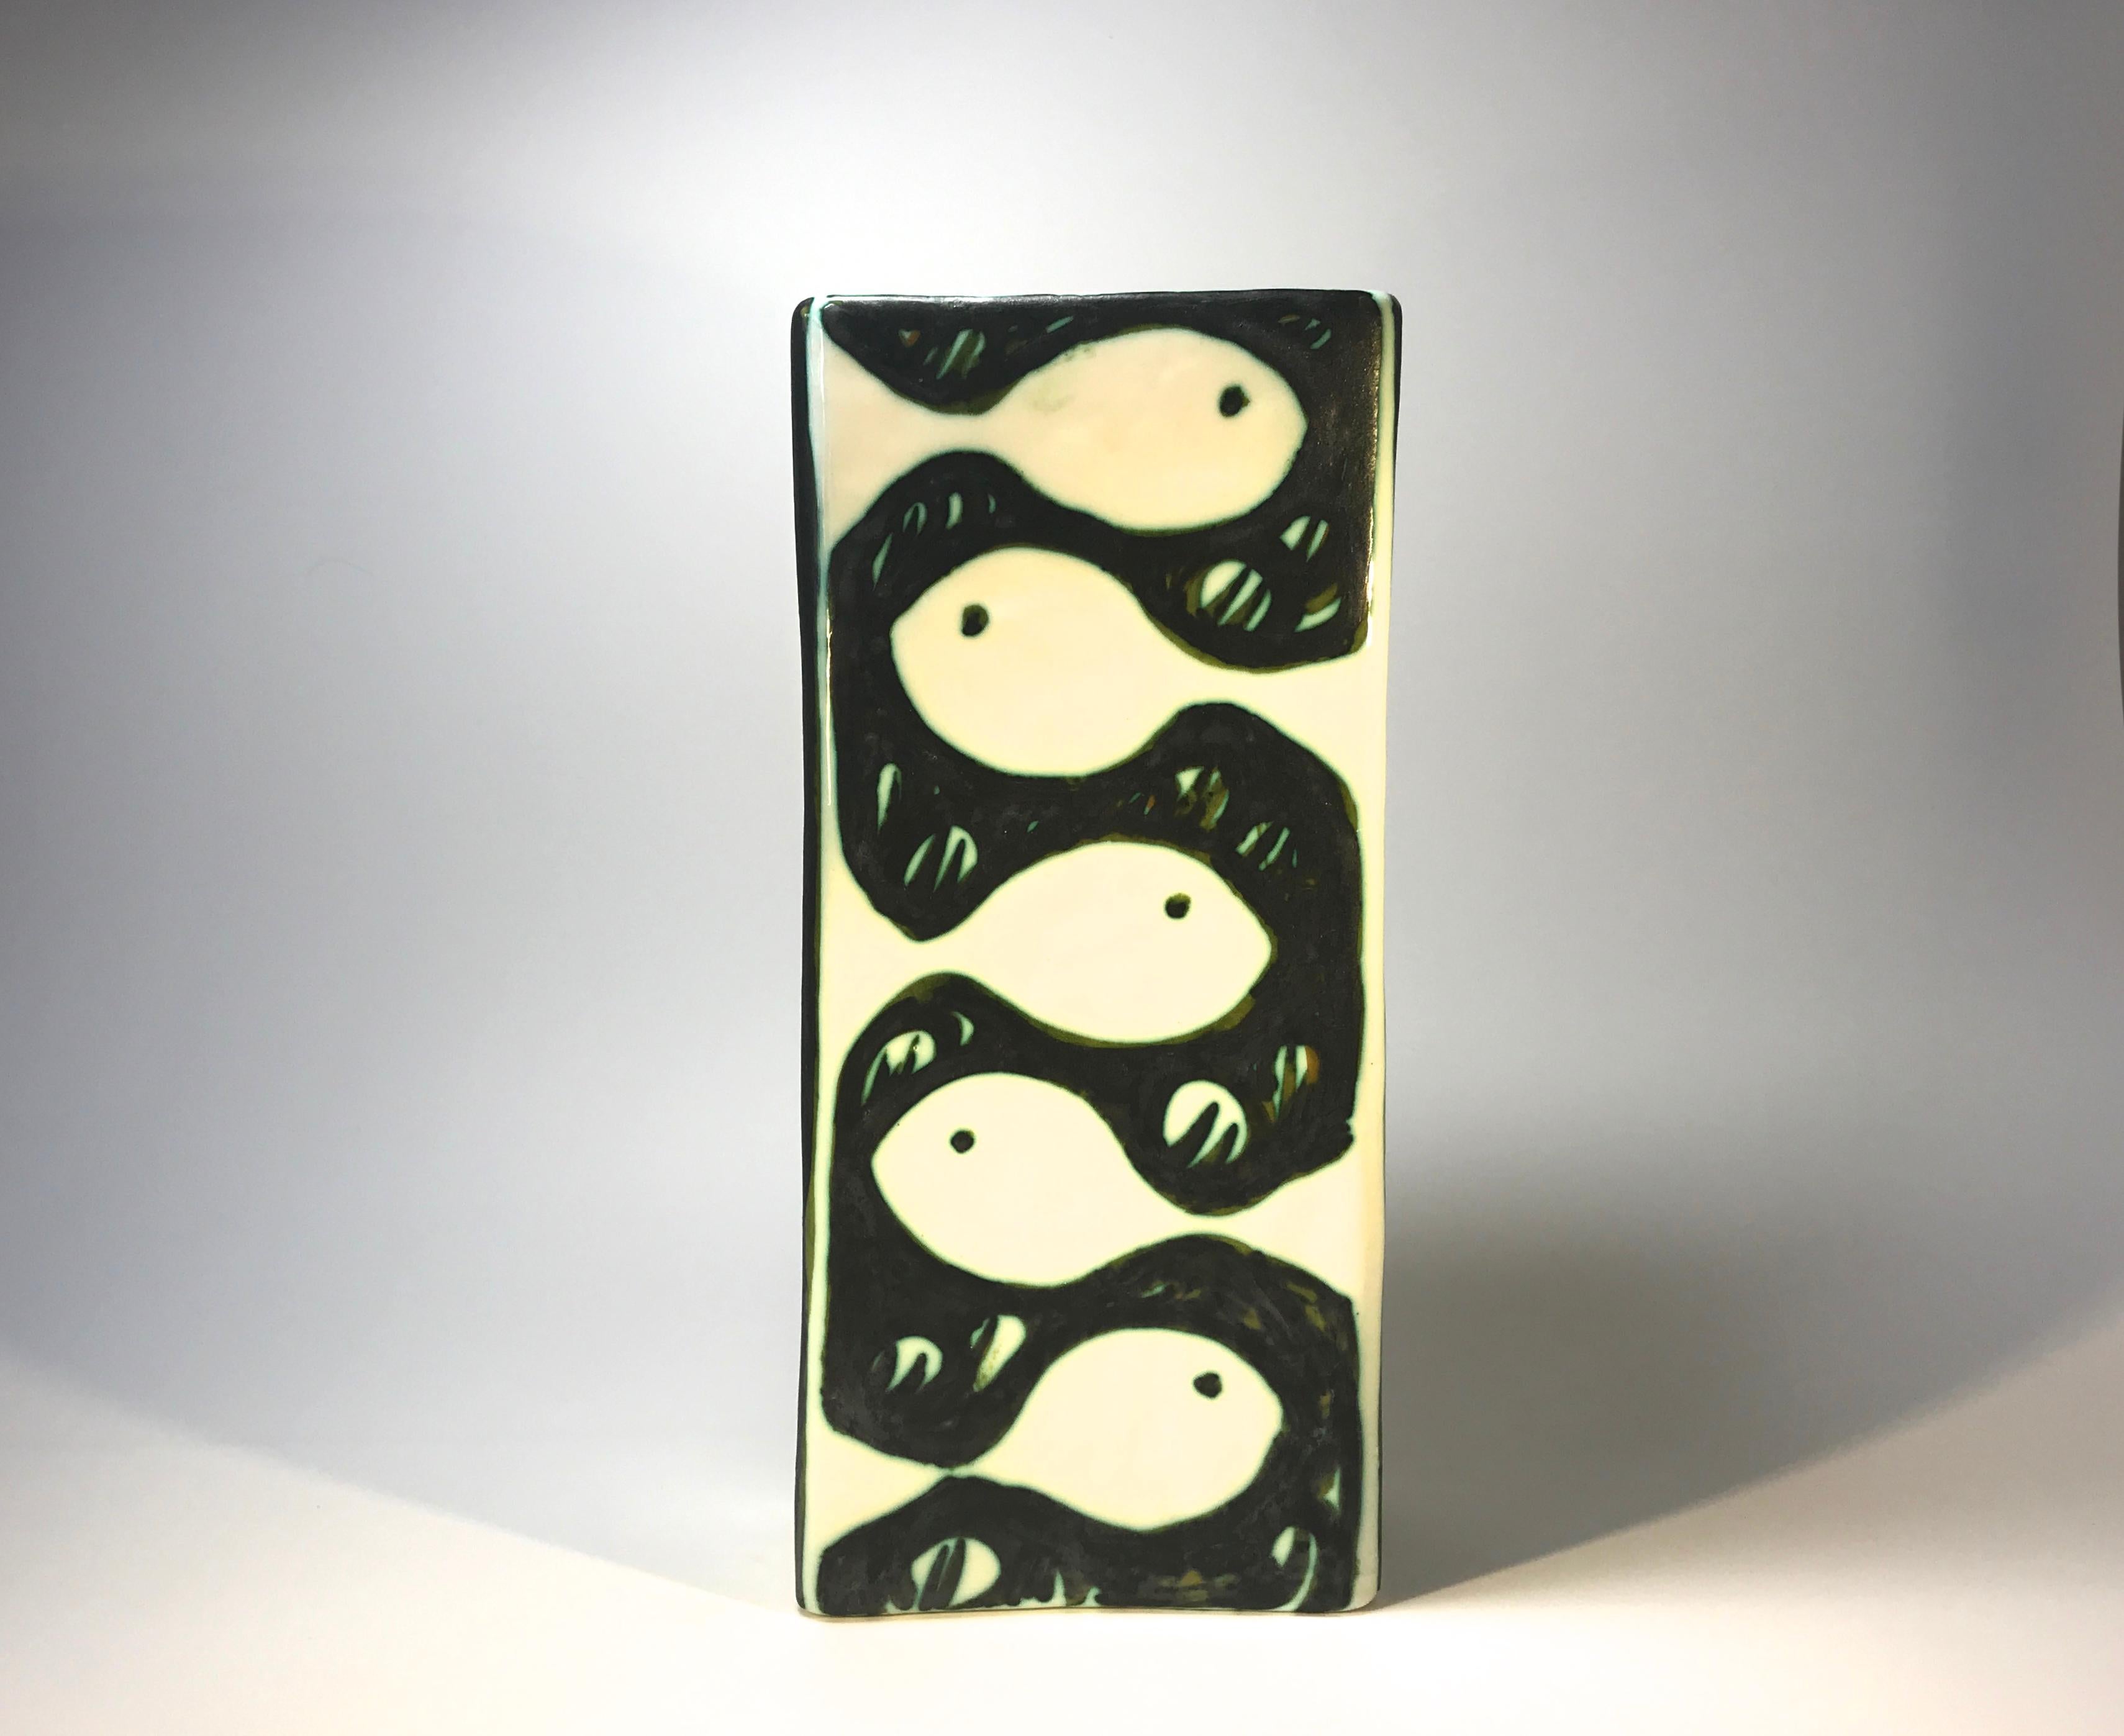 Alessio Tasca green and white tall oblong vase with fish design front and back. Five fish one side and four on the reverse,
circa 1960s
Signed 1456-B Tasca Nove on base
Good condition, hairline crack and crazing inside with minor crazing on same